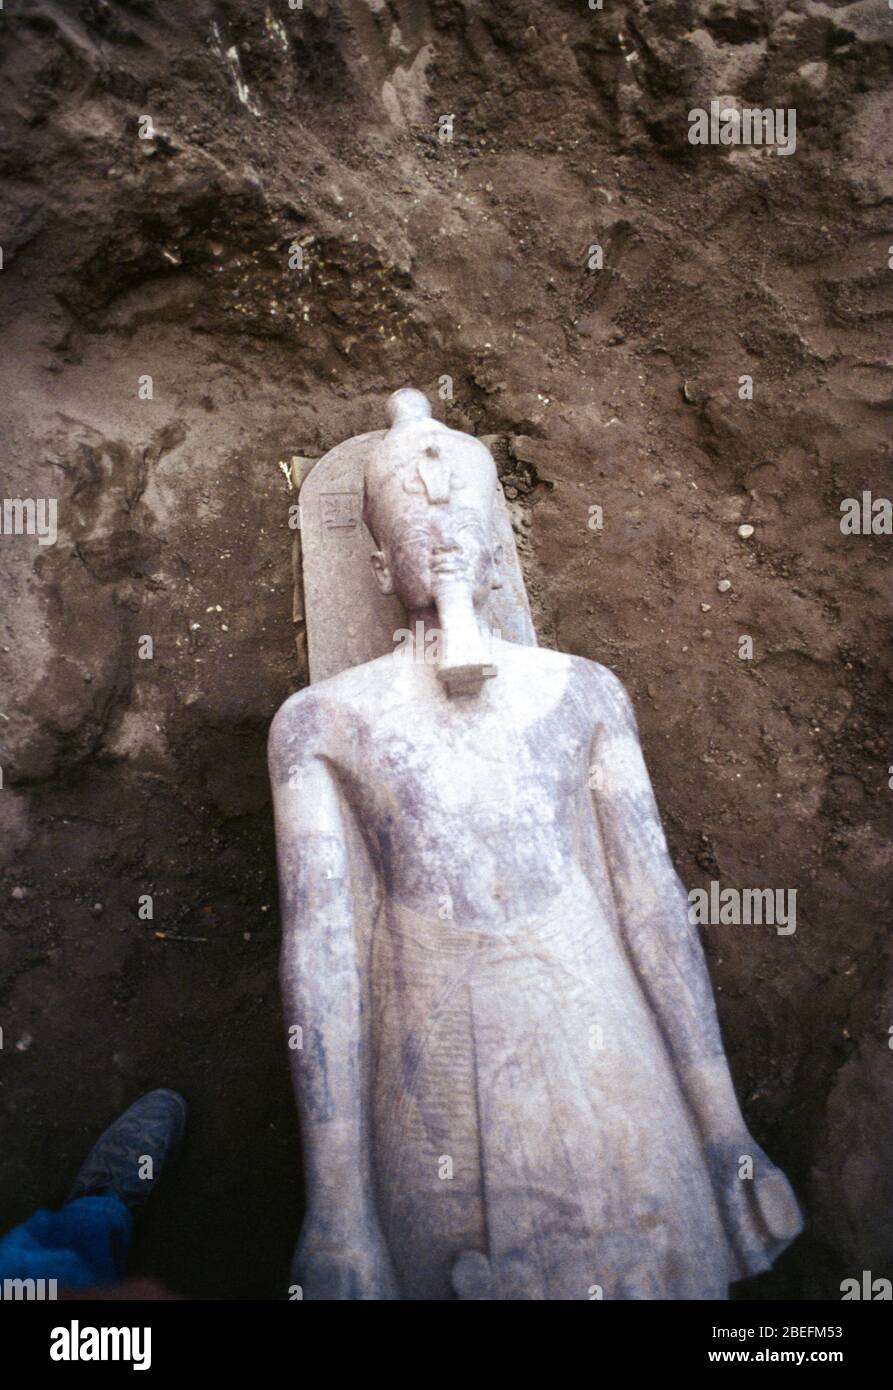 22 January 1989 - Luxor, Egypt -- The Luxor Temple statue cache was one of the most significant archaeological discoveries of the decade, where a grouping of ancient Egyptian statues was unearthed on January 22nd, 1989, during routine maintenance of the temple in a heavily traveled tourist area.  They were discovered beneath the solar court of the 18th dynasty Pharaoh Amenhotep III.  A partial list of statues: Thutmosis III, Amenhotep III, the goddess Lunyt, Tutankhamun, Horemheb, Amun-Re-Kamutef and the Goddess Tawaret.  The excavation was launched in 1989 under the authority of Mohamed El So Stock Photo